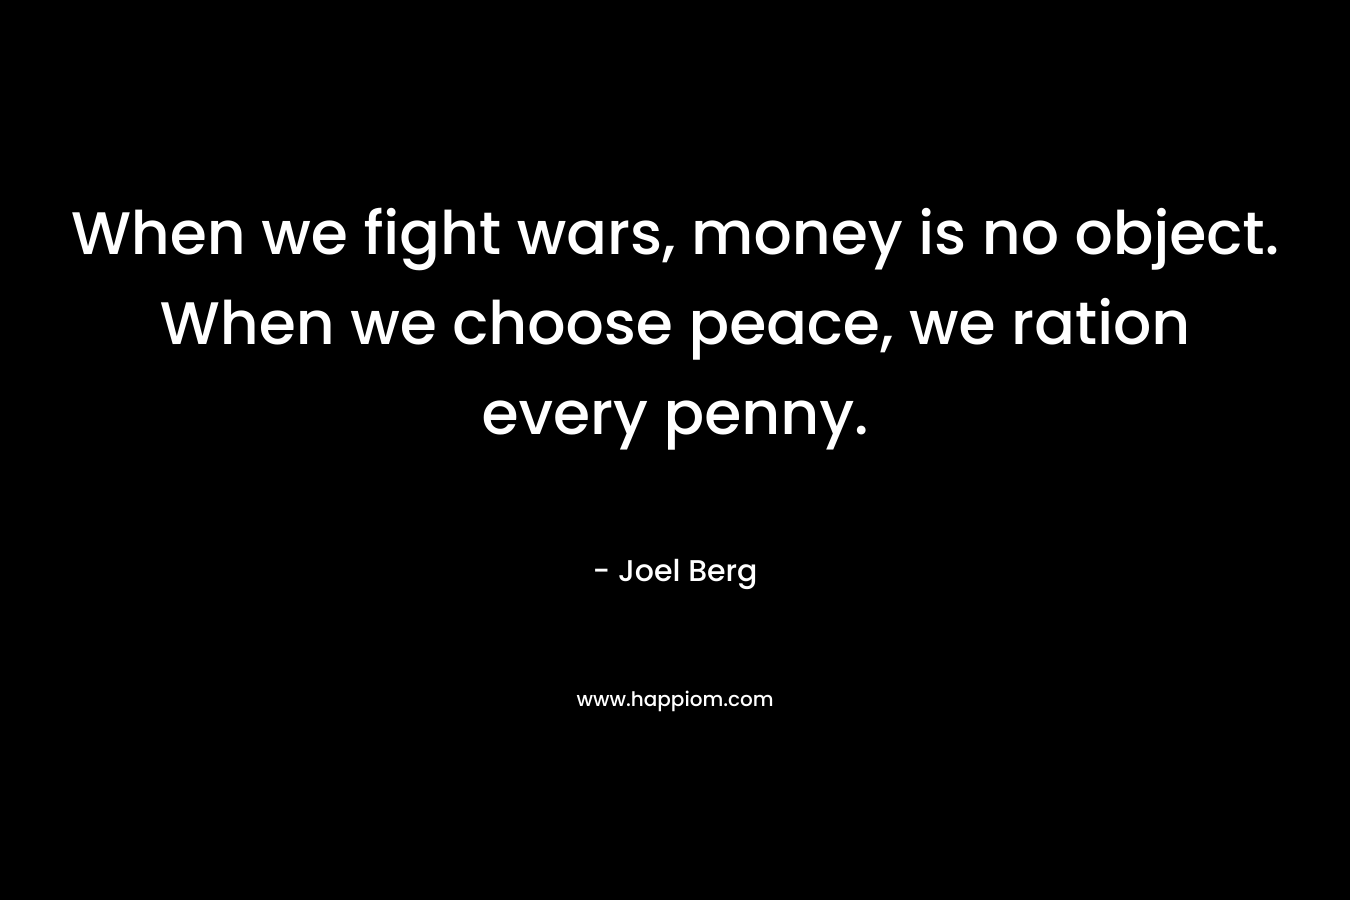 When we fight wars, money is no object. When we choose peace, we ration every penny.